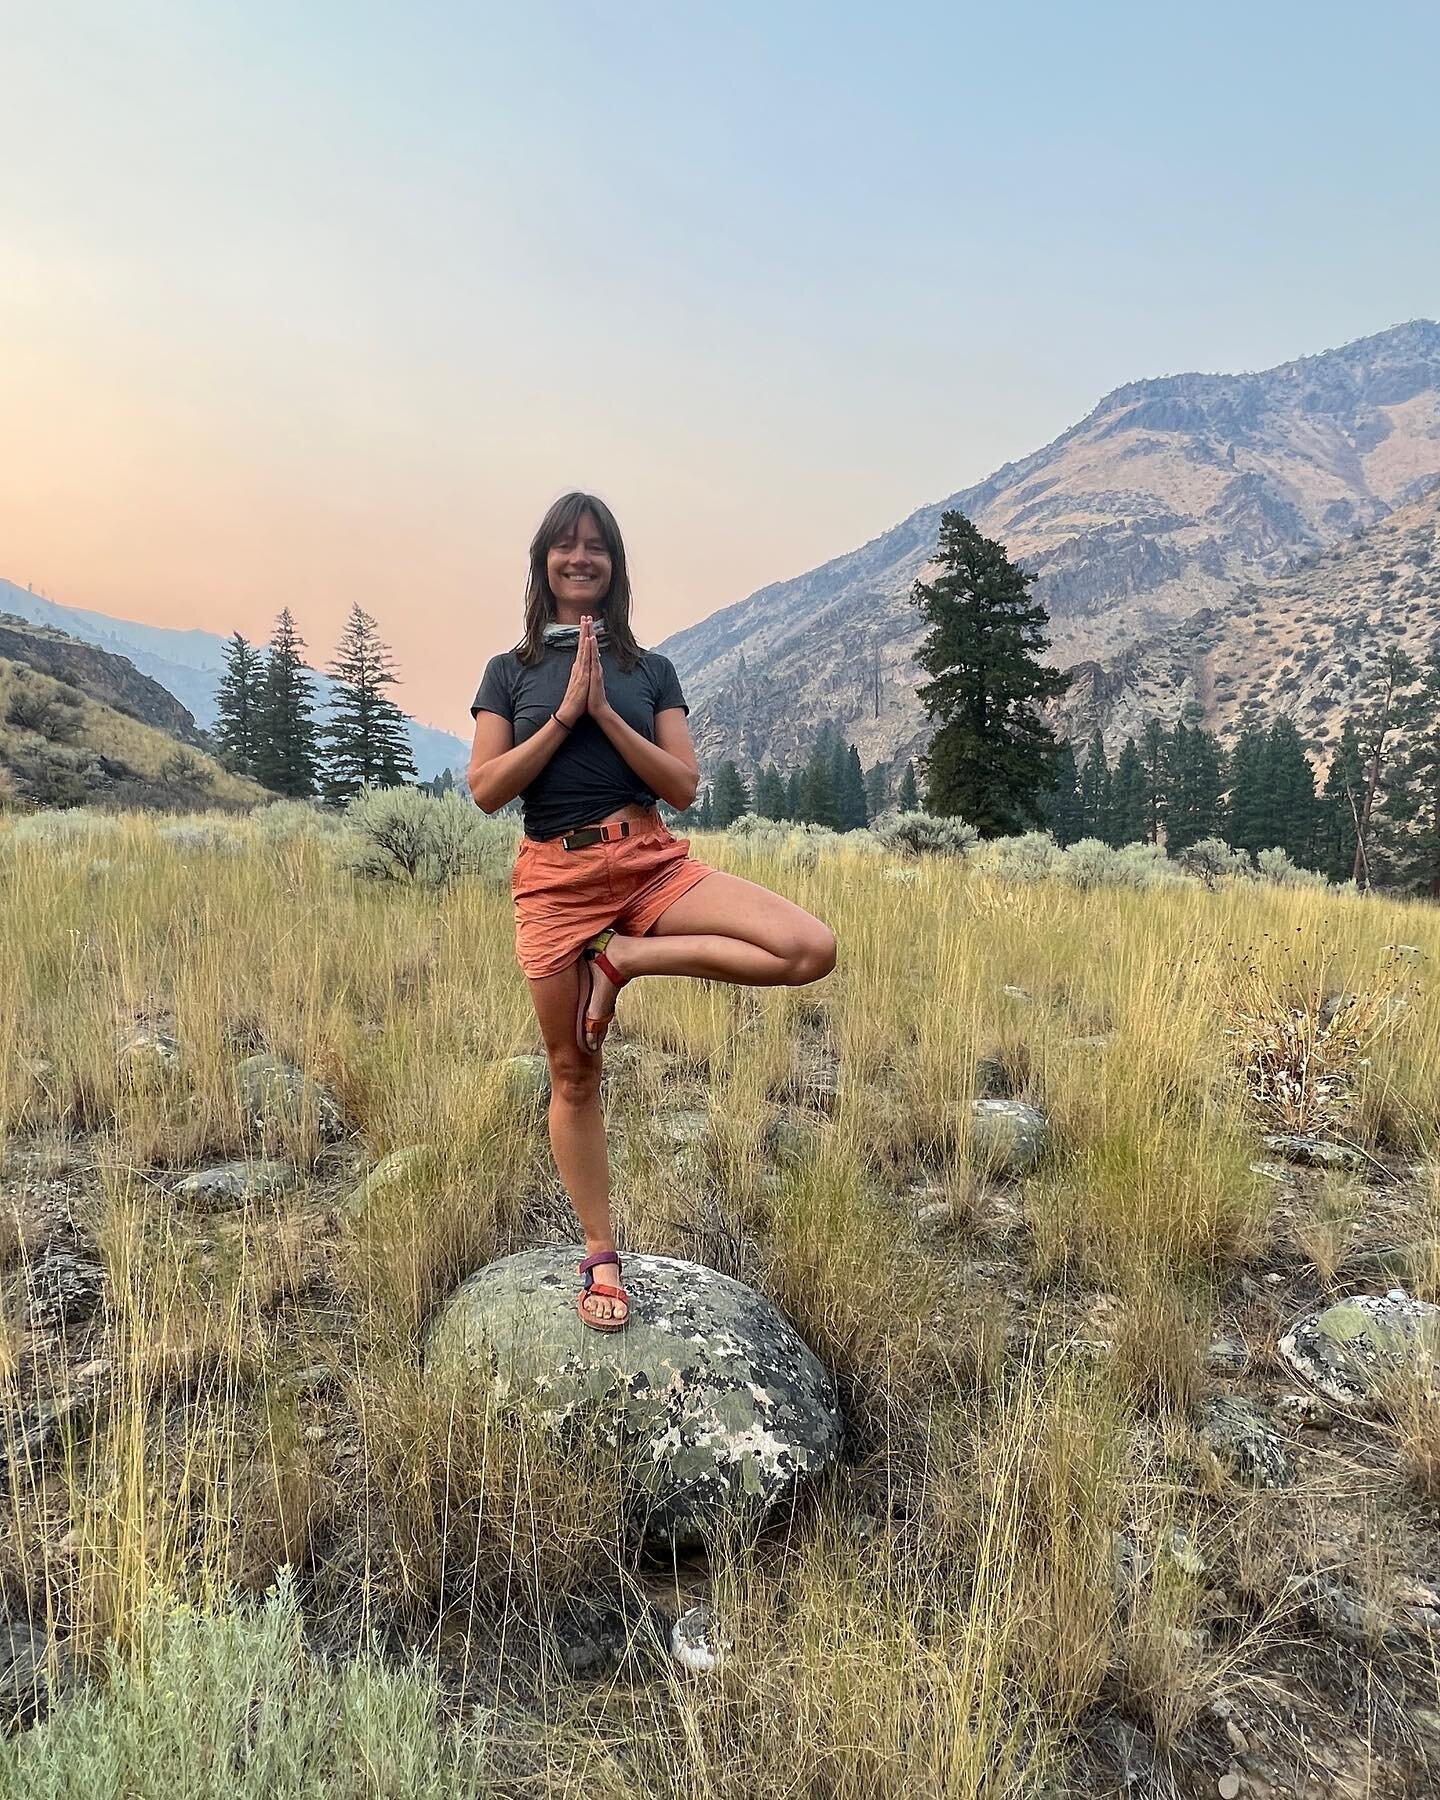 I&rsquo;m back from 5 days rafting the Middle Fork of the Salmon River In Idaho in 2.3 MILLION acres of wilderness beautifully guided and taken care of by @geoffreyyoga and @middleforkrapidtransit . Feeling refreshed, grounded + a bit wild from total